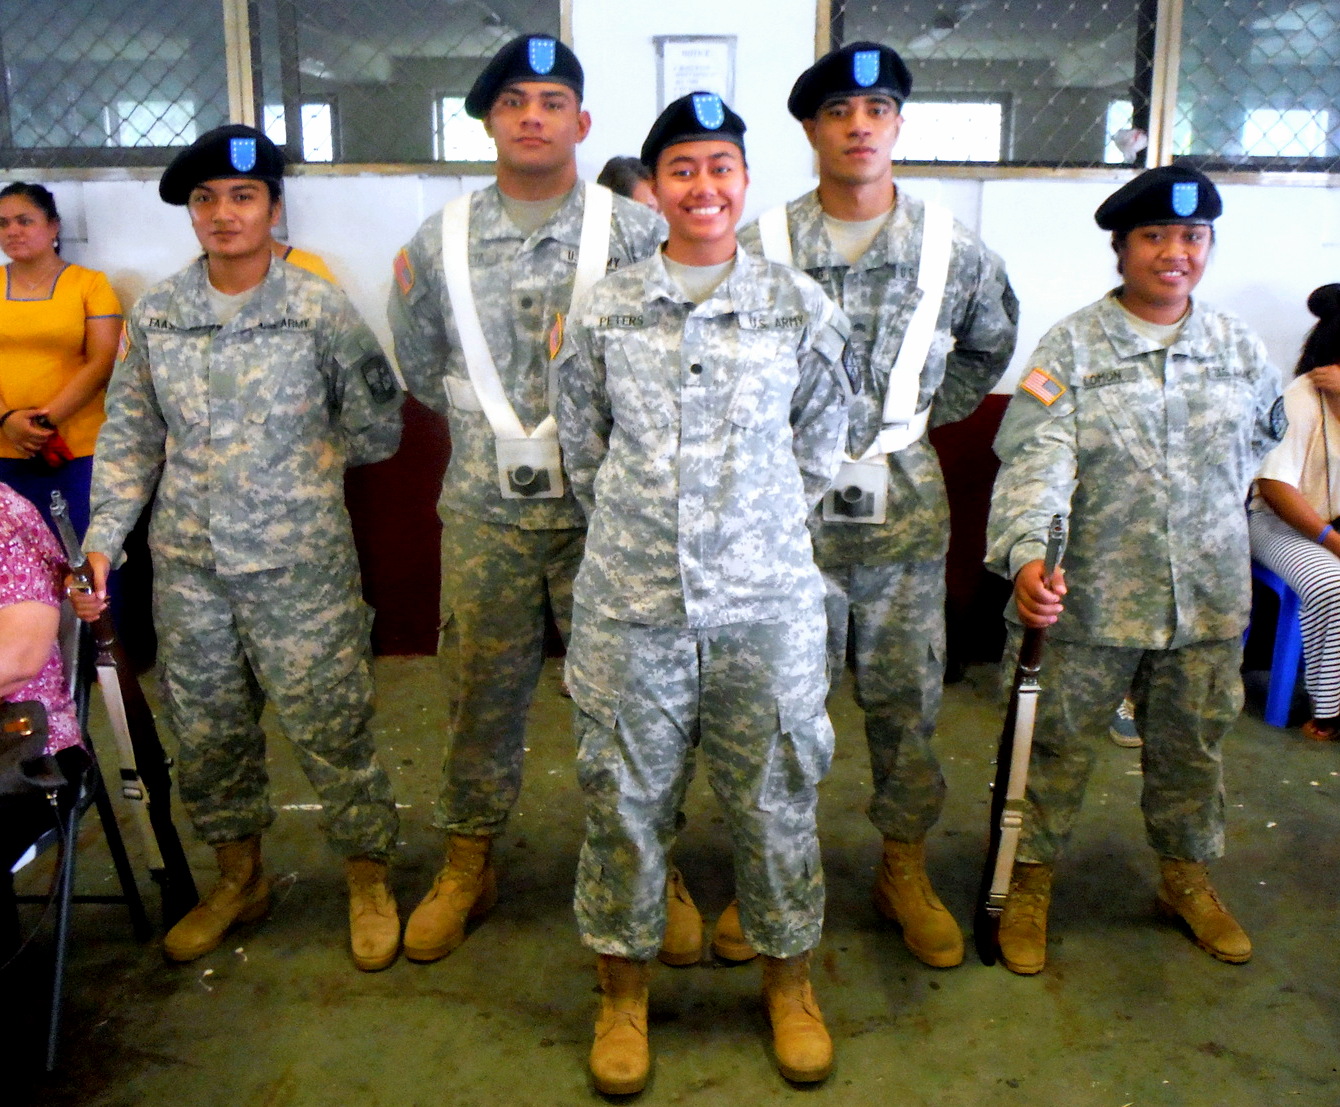 When not taking part in training activities, American Samoa Community College ROTC cadets play a ceremonial role in the College’s graduation ceremony.